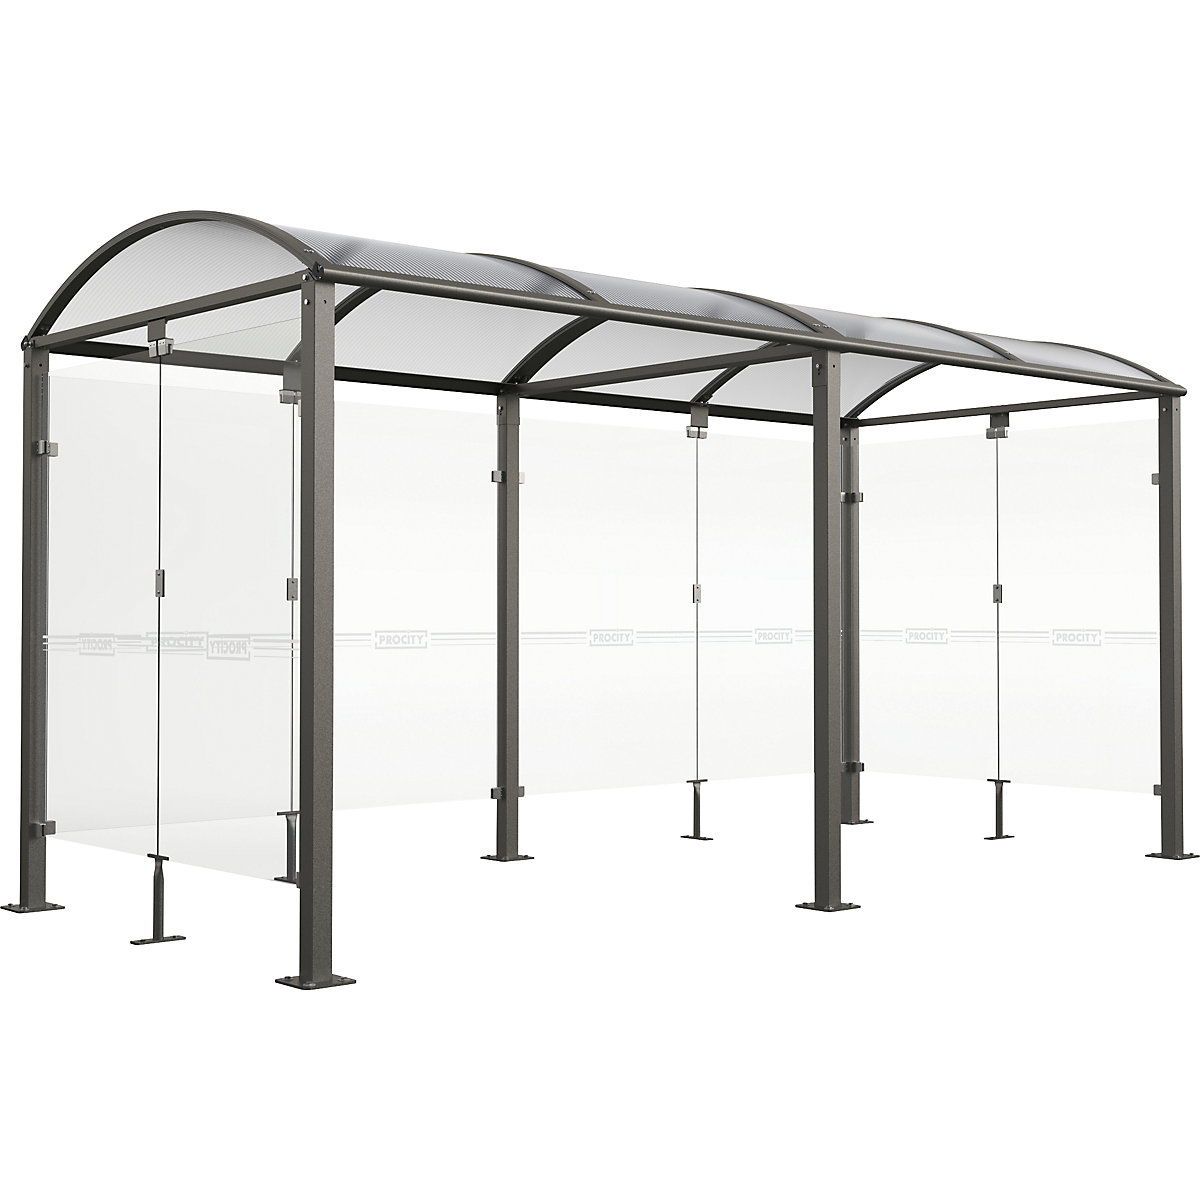 Bicycle shelter with glass - PROCITY